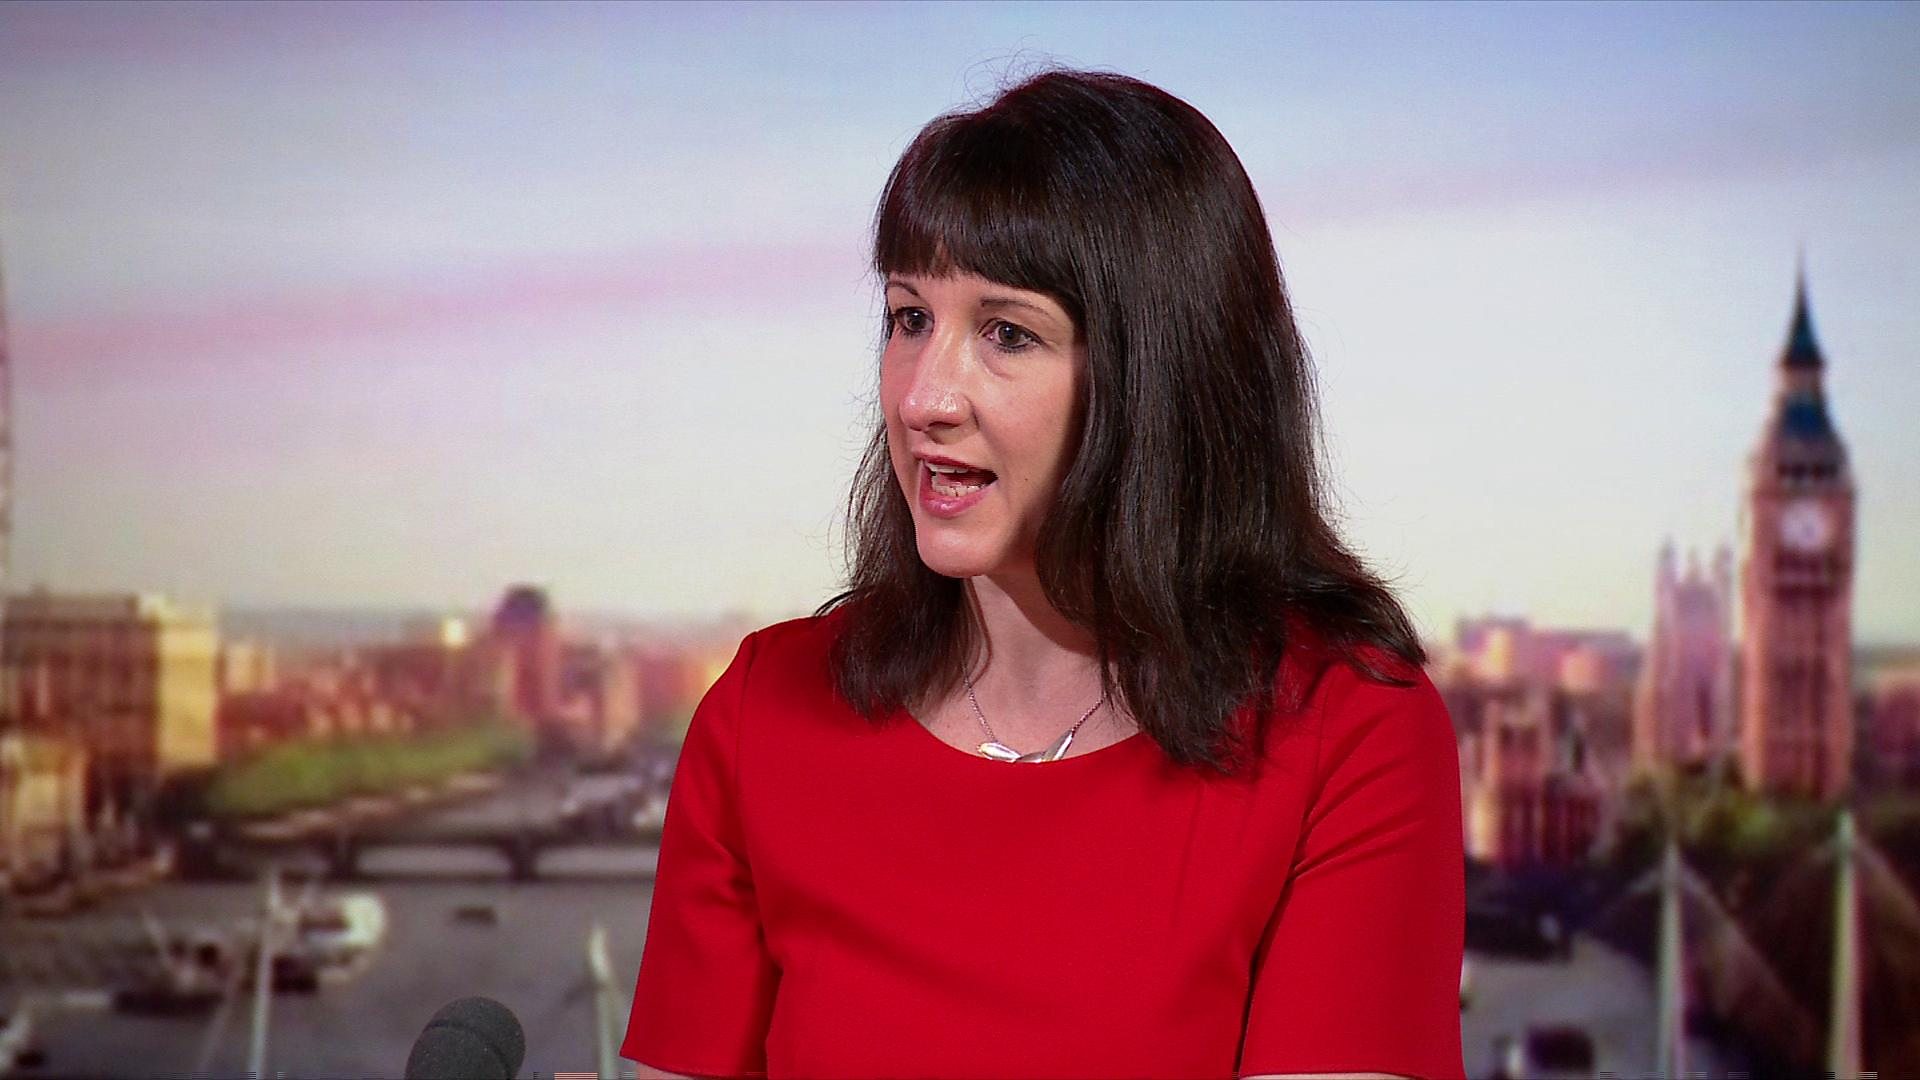 UK Covid-19: Labour’s Rachel Reeves suggests Covid Plan B should be Brought